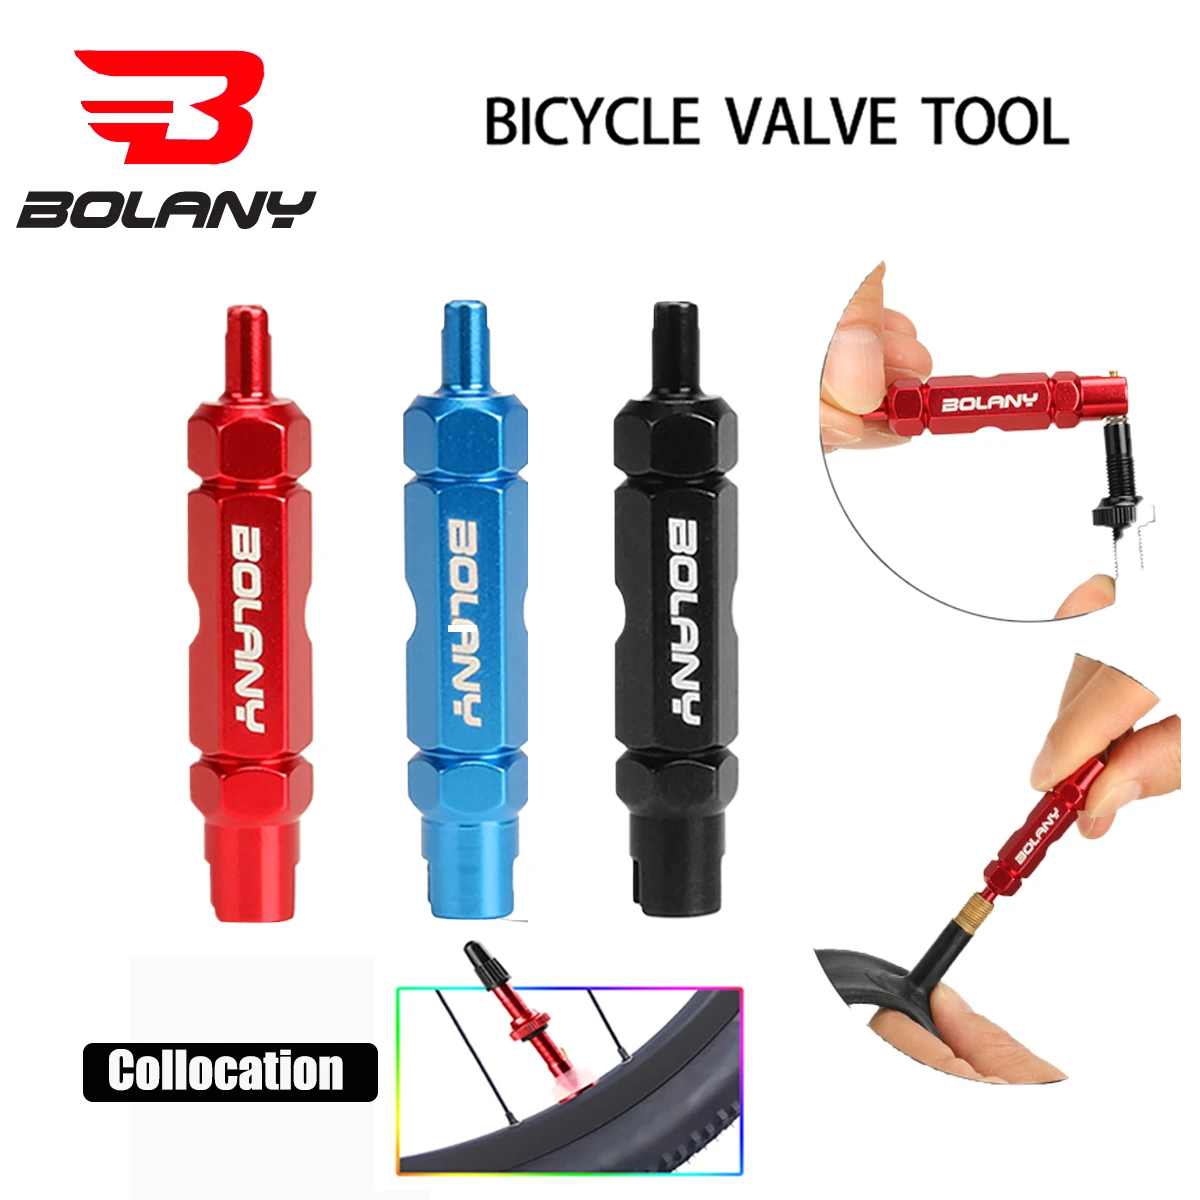 Bolany Bicycle Tire Nozzle Wrench Multifunctional Valve Core Tool Double-head Portable Removal Disassembly Spanner Bike Repair